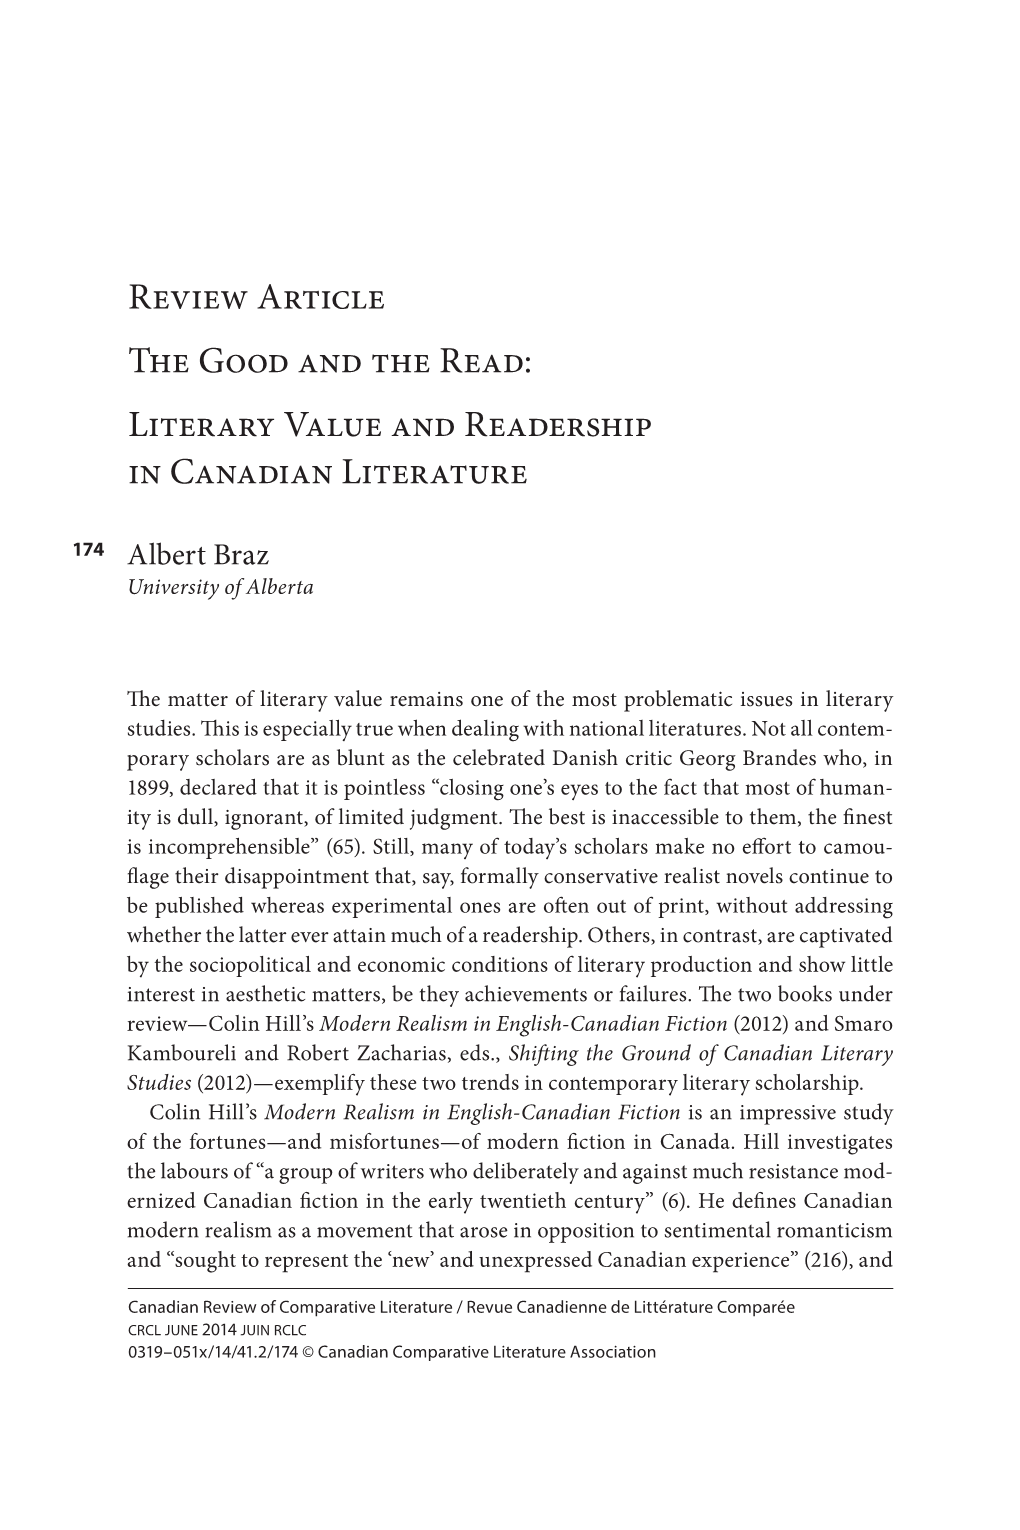 Review Article the Good and the Read: Literary Value and Readership in Canadian Literature